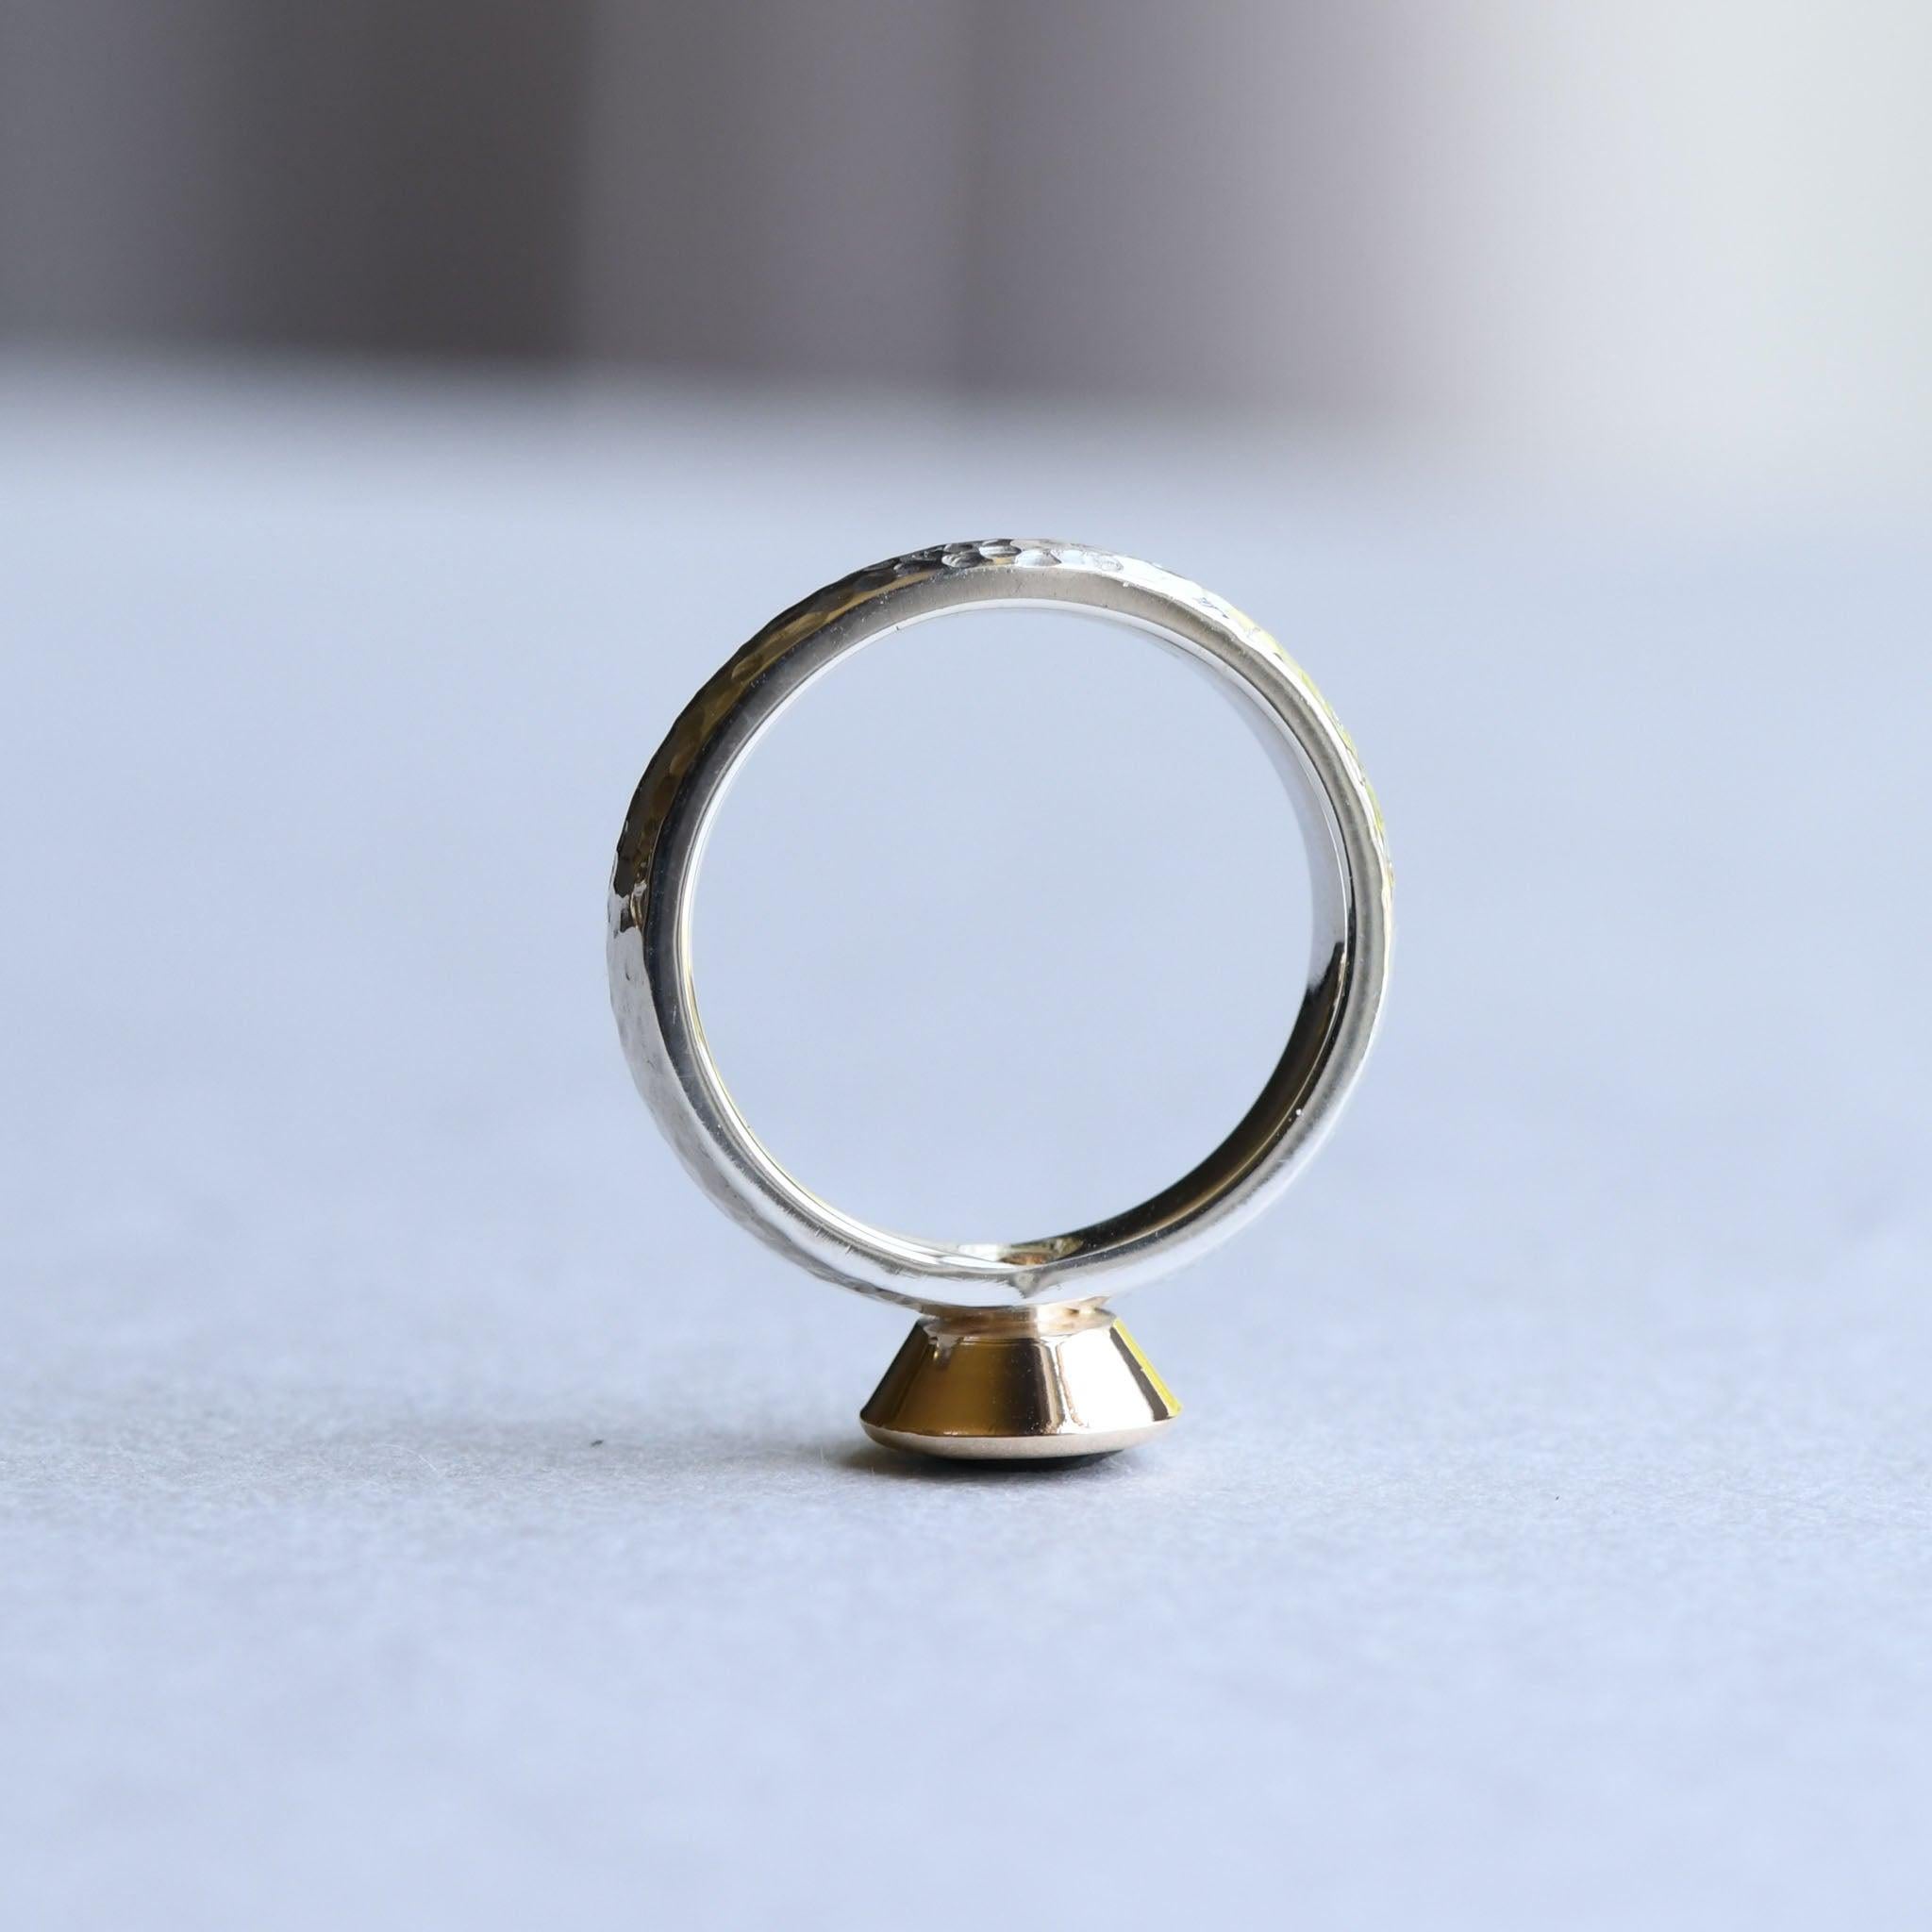 For Sale:  Two Tone Hammered Ring, London Topaz Ring, 14k Bezel Gold with Sterling Silver 7